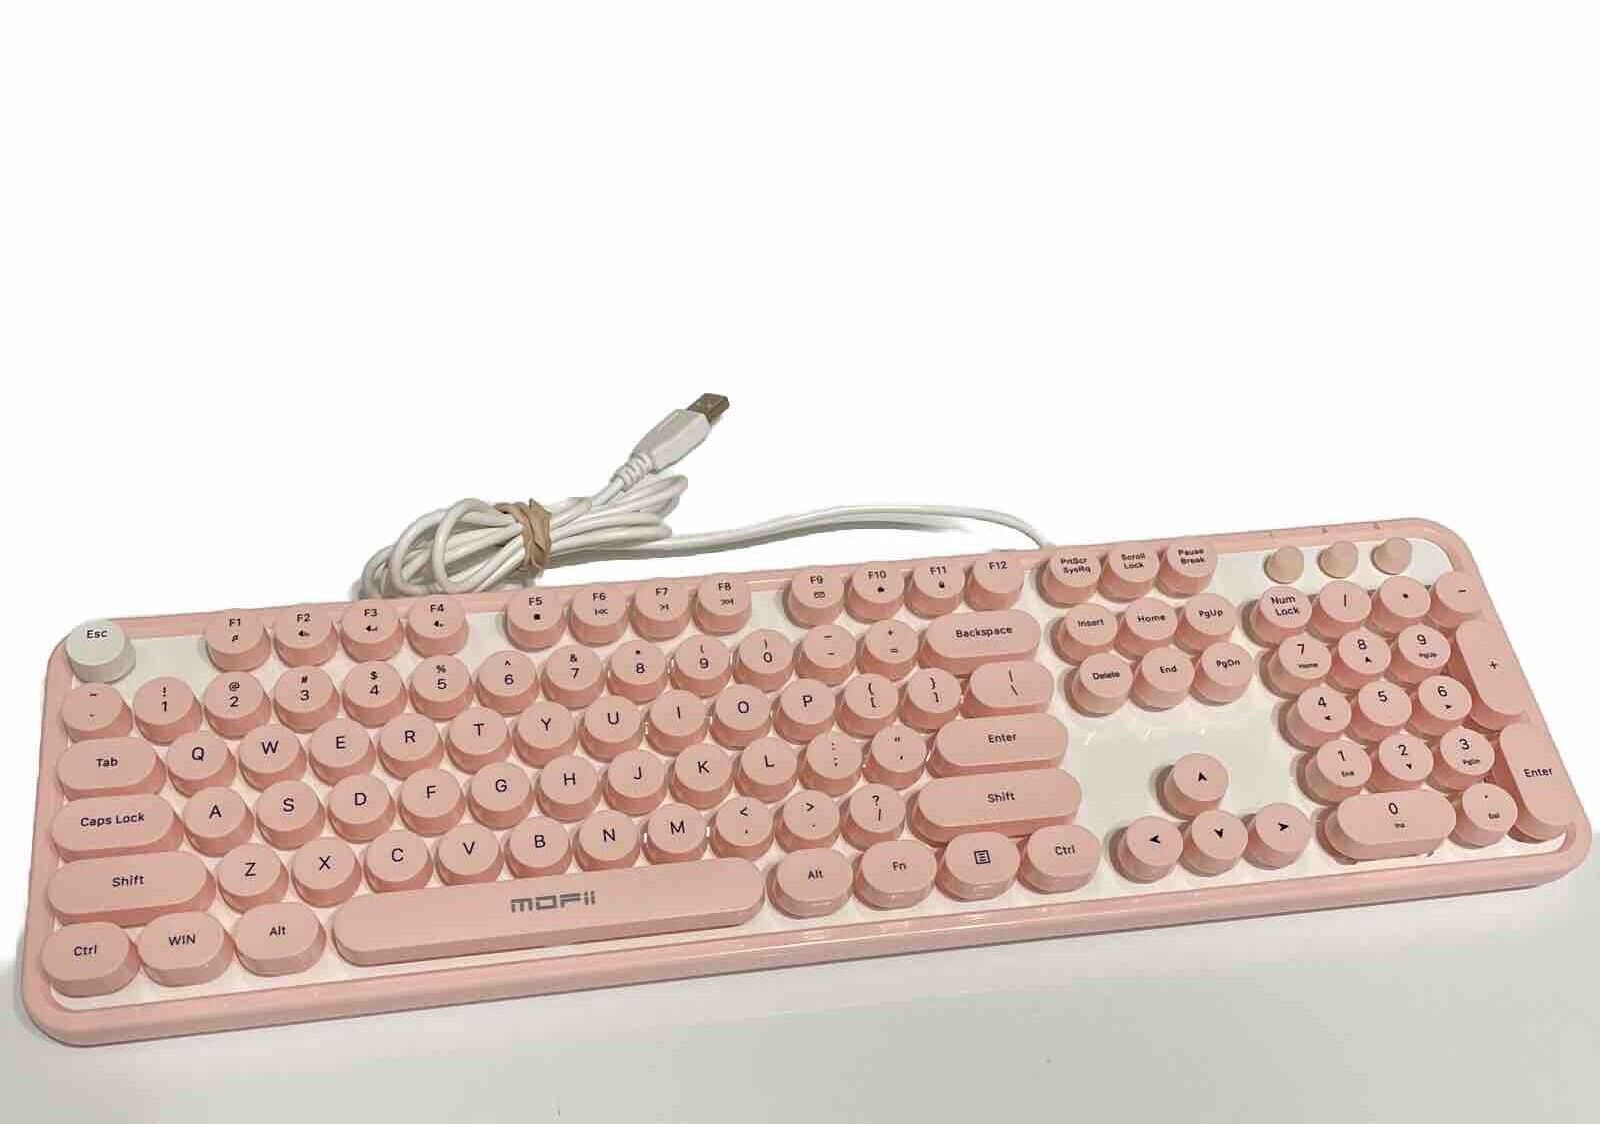 Mofii Keyboard PC Wired USB No Mouse Pink Keys Rare Color Retro Round